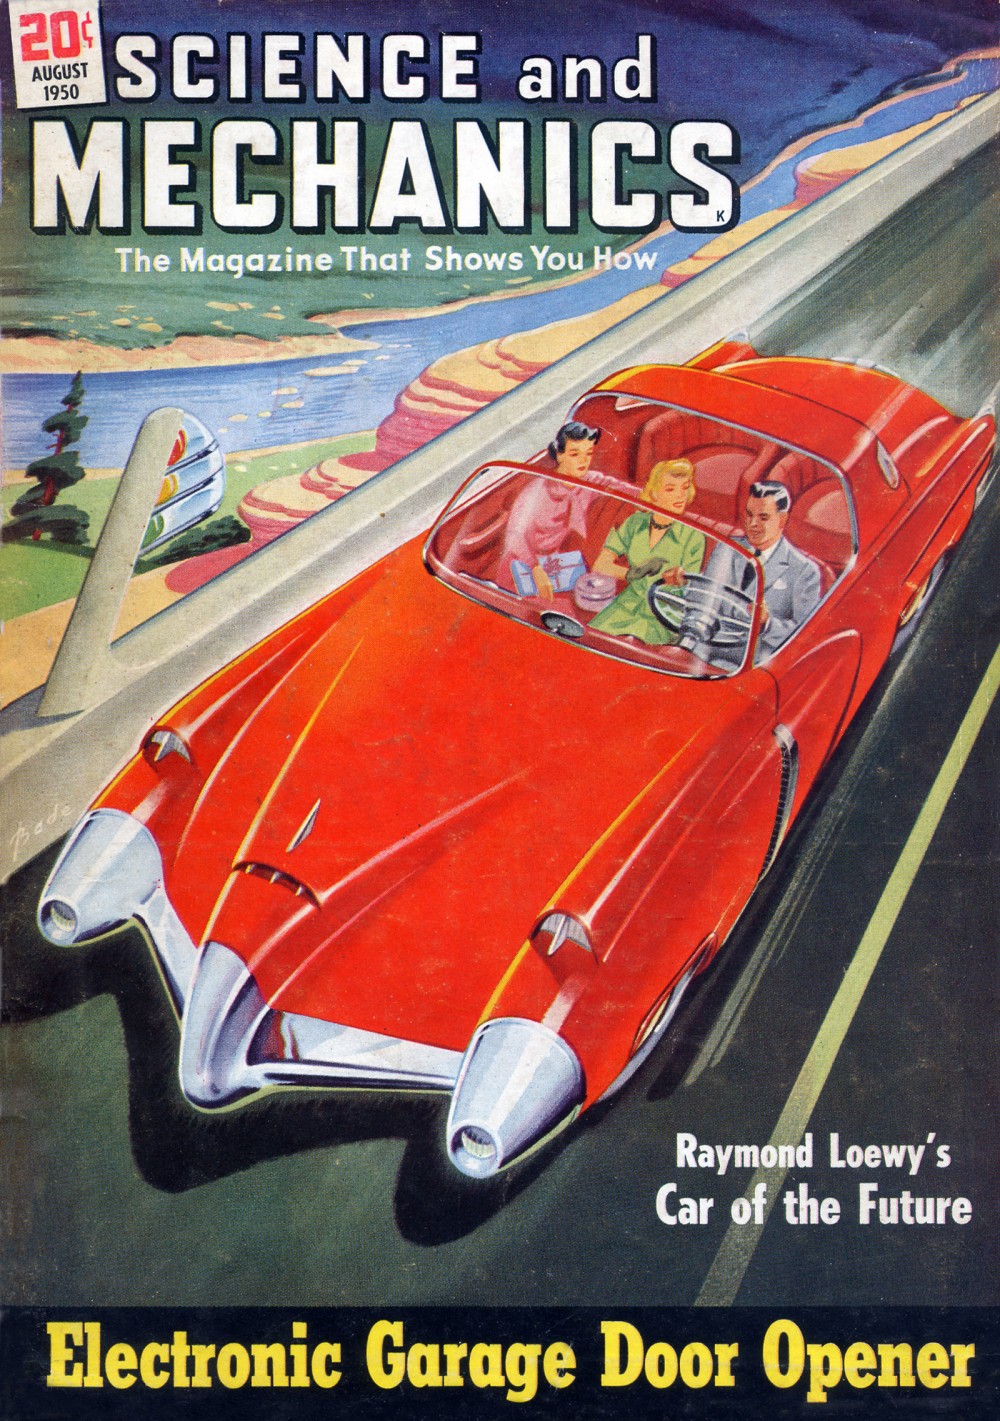 While the car had been around for decades by the 1950s, car culture really took off as a national fad during the decade. Arthur C. Base, August 1950 issue of Science and Mechanics. Wikimedia, http://commons.wikimedia.org/wiki/File:Car_of_the_Future_1950.jpg.